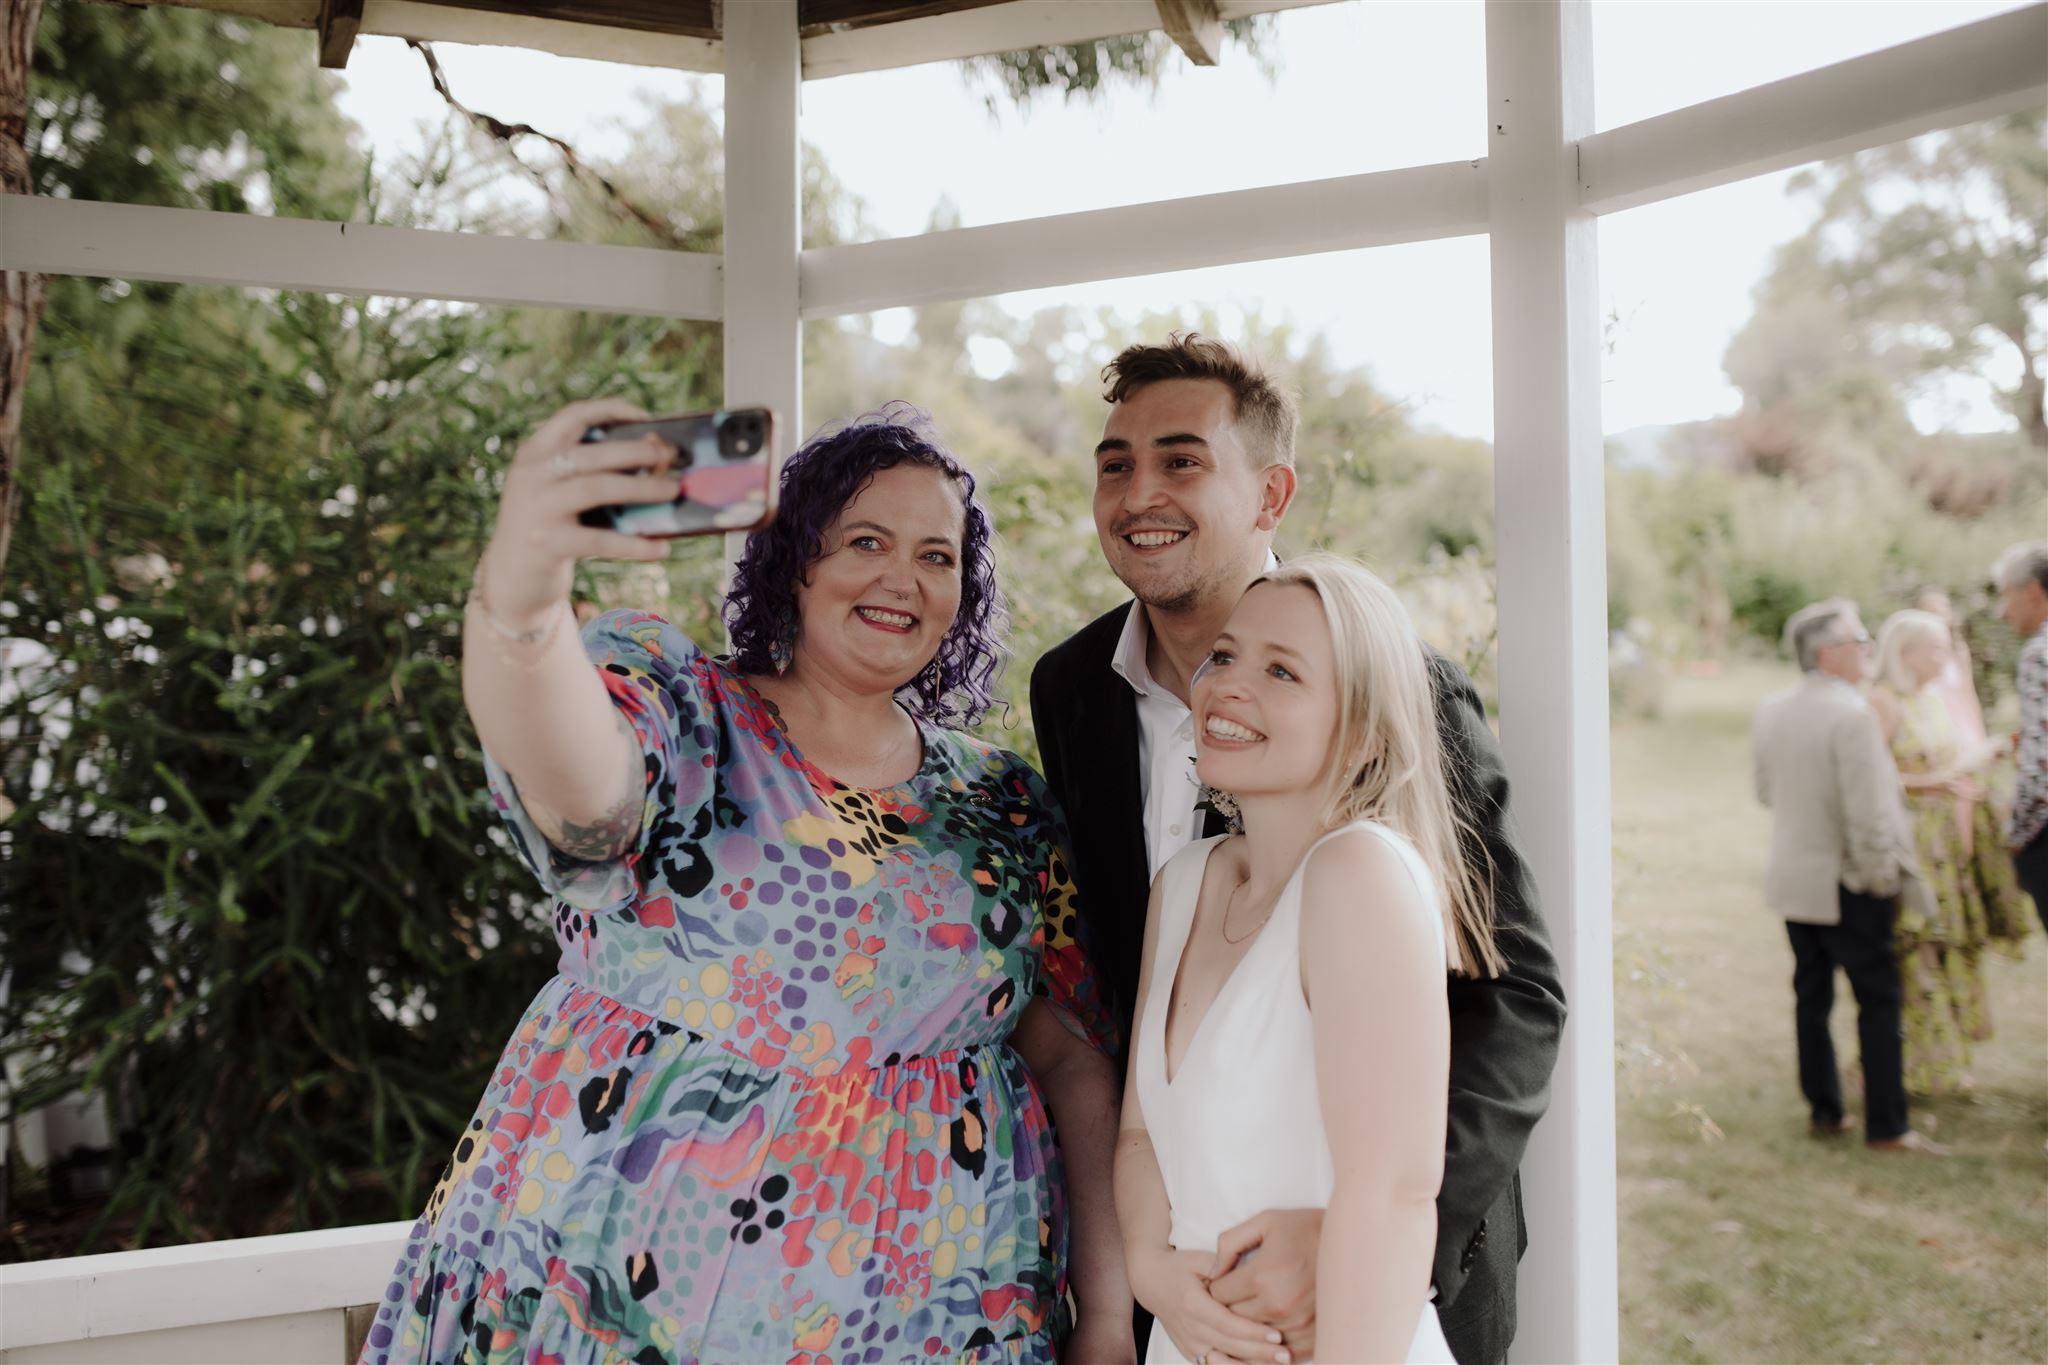 Three people are taking a selfie—two have just gotten married and the third person is holding the phone out in front of them all. 